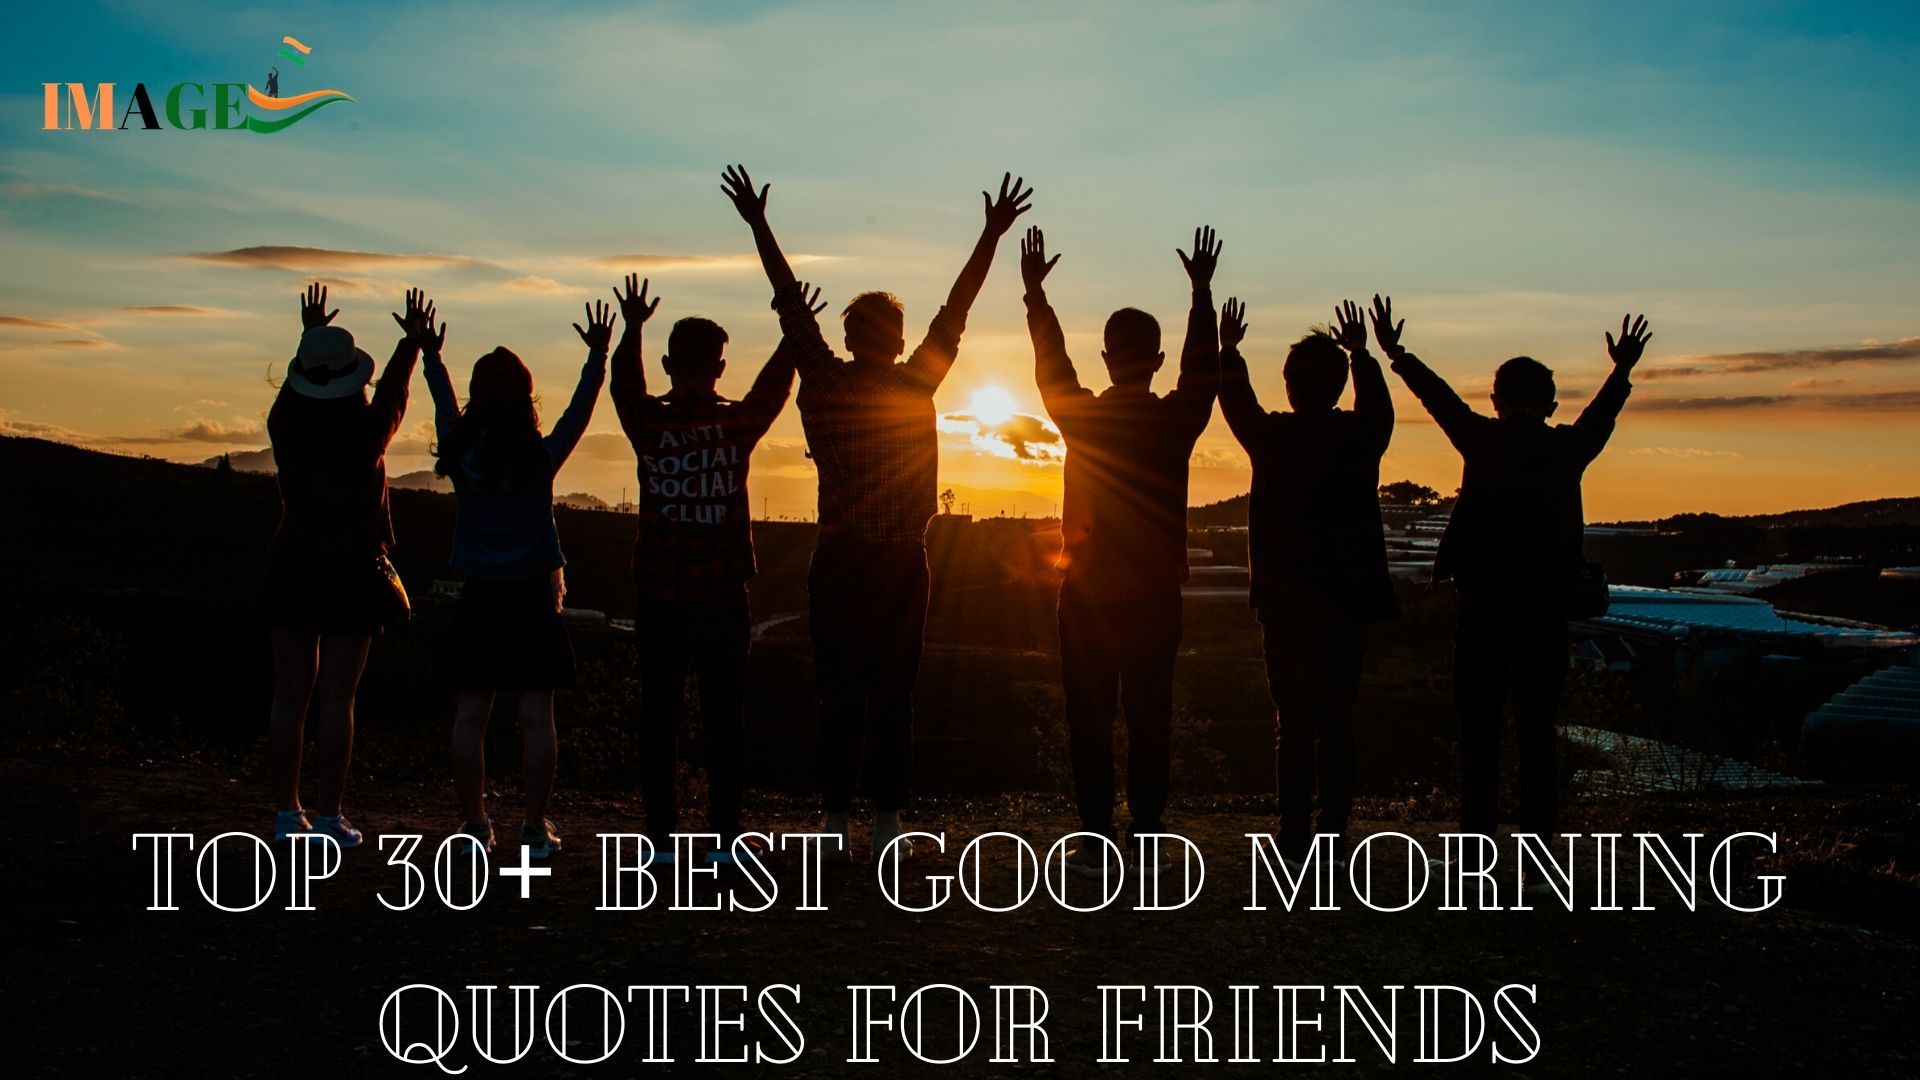 Best Good Morning Quotes for Friends (Share Free)